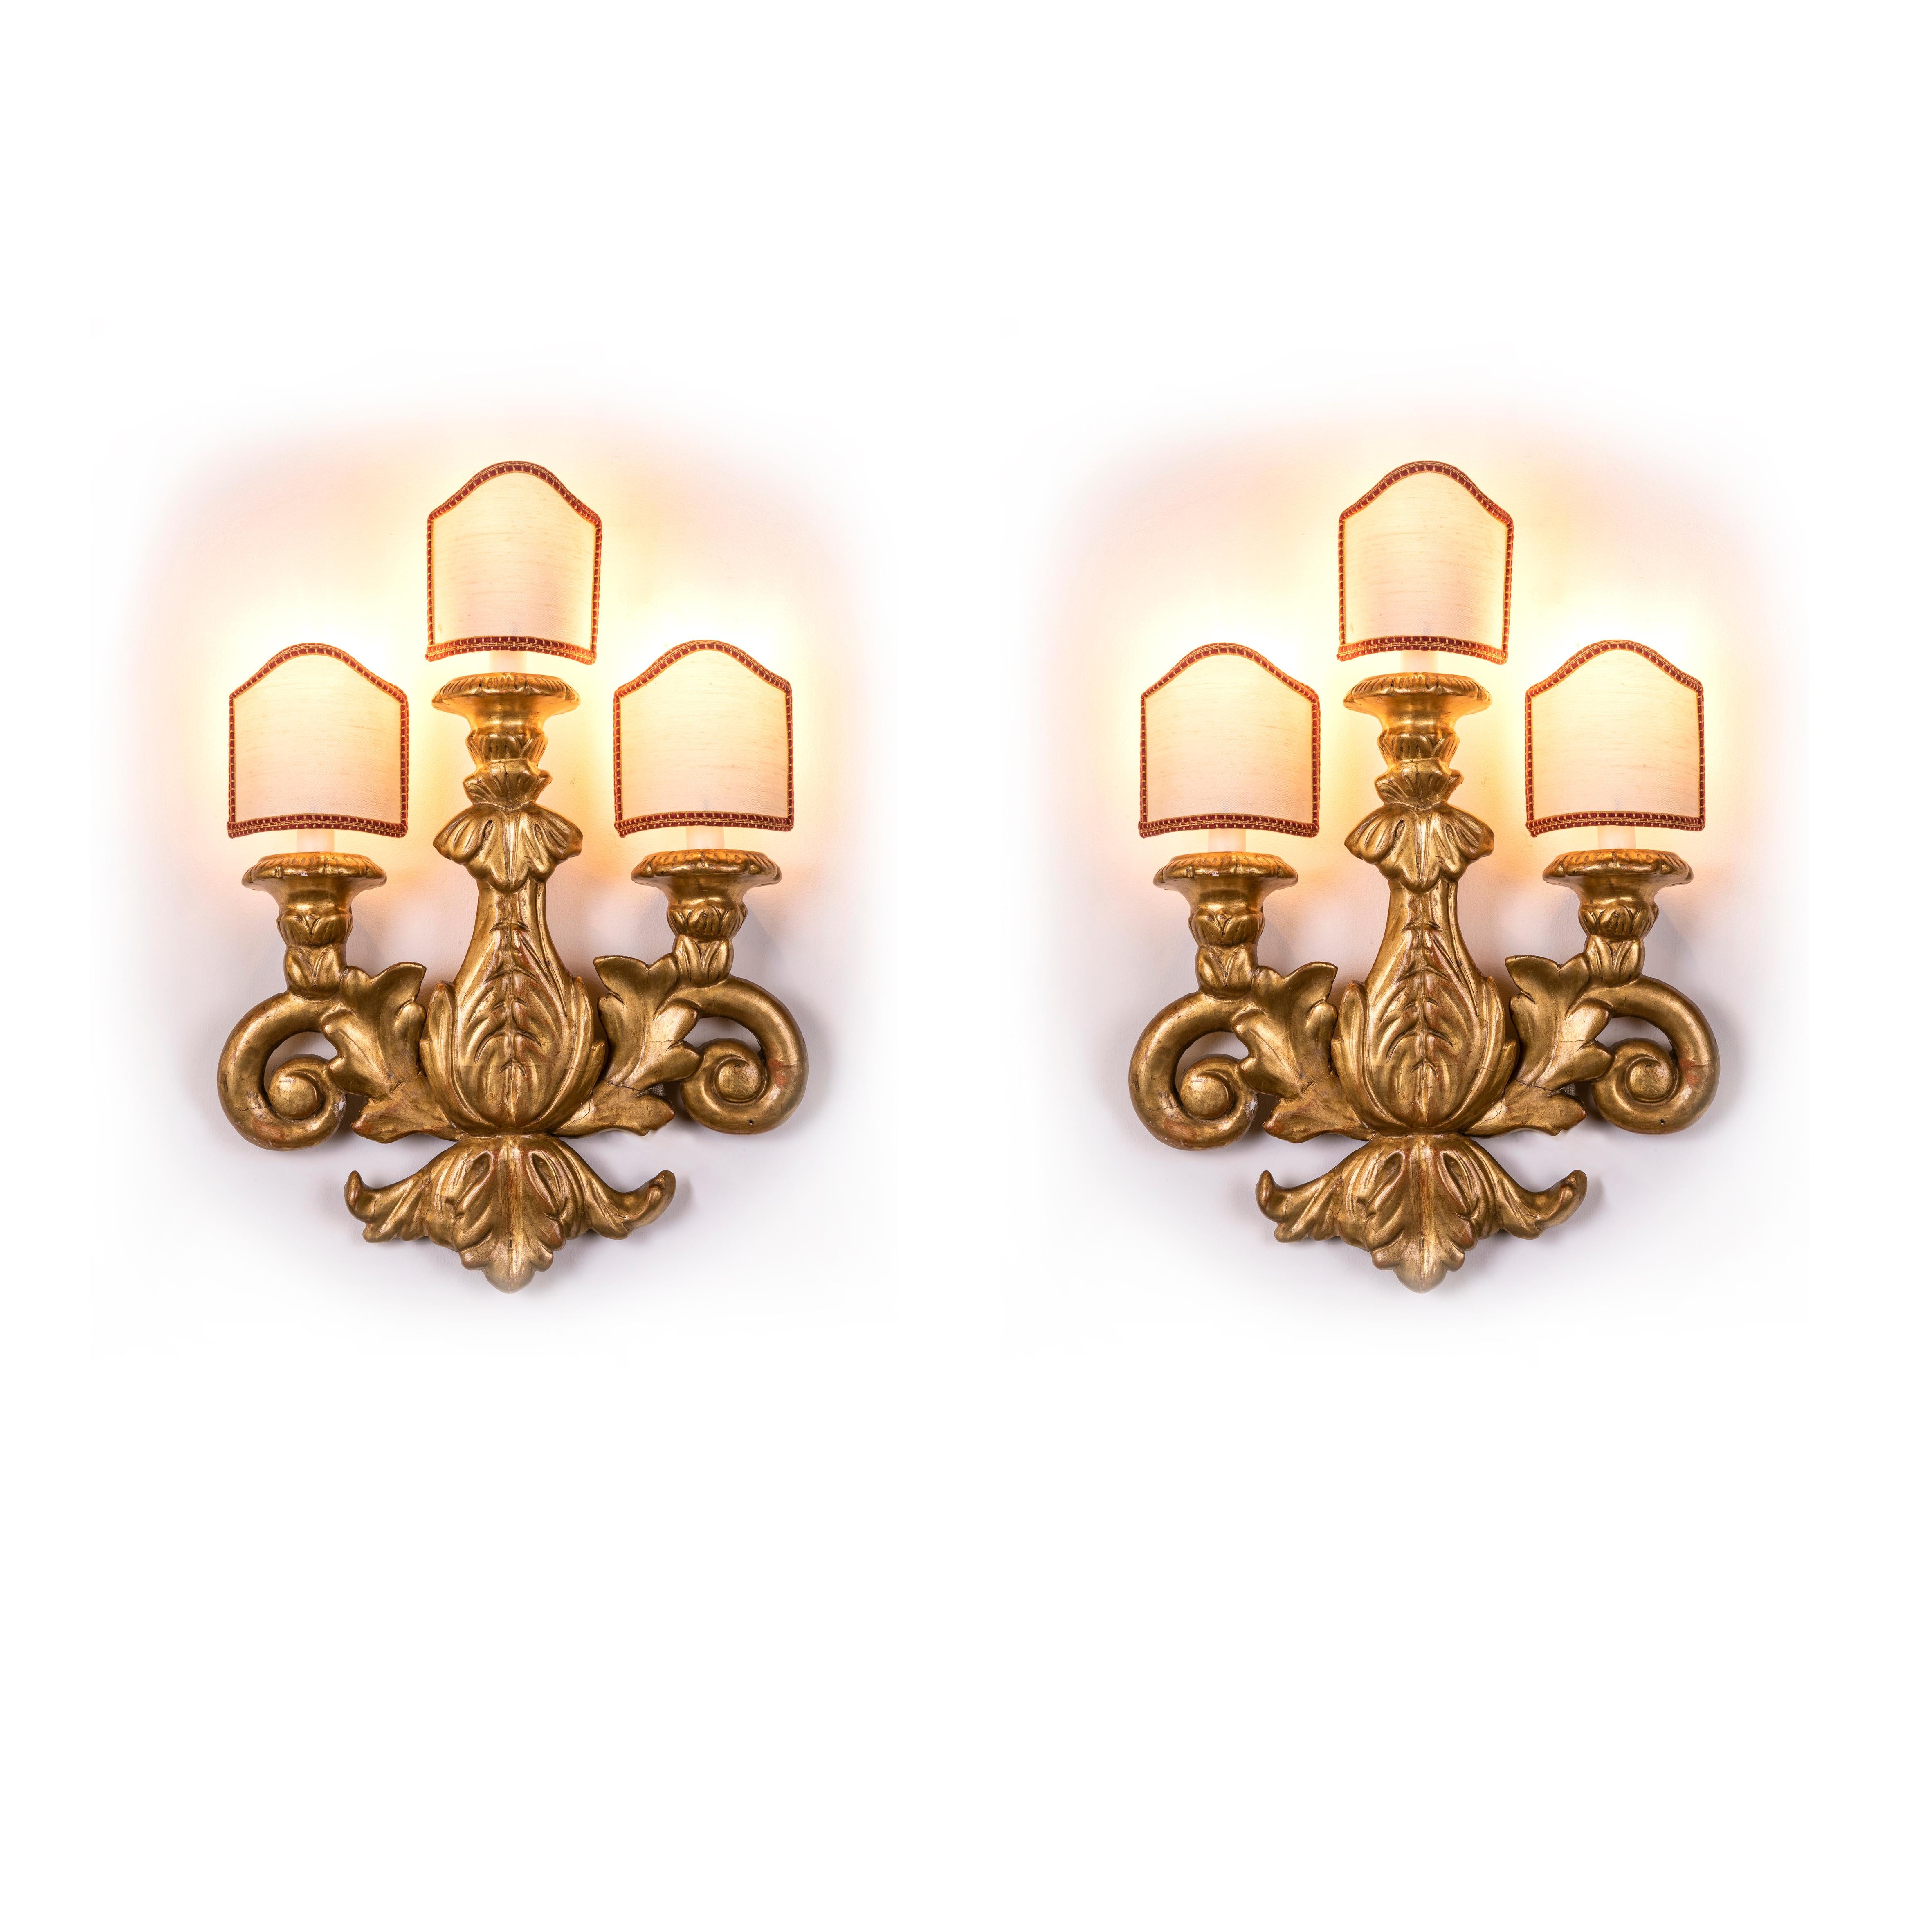 A pair of antique carved with vegetal patterns and gilded wooden wall-lights, Italian three-light sconces dating back to early 19th century. 
They came from a private house of Milan and we presume they were originally part of a larger liturgical